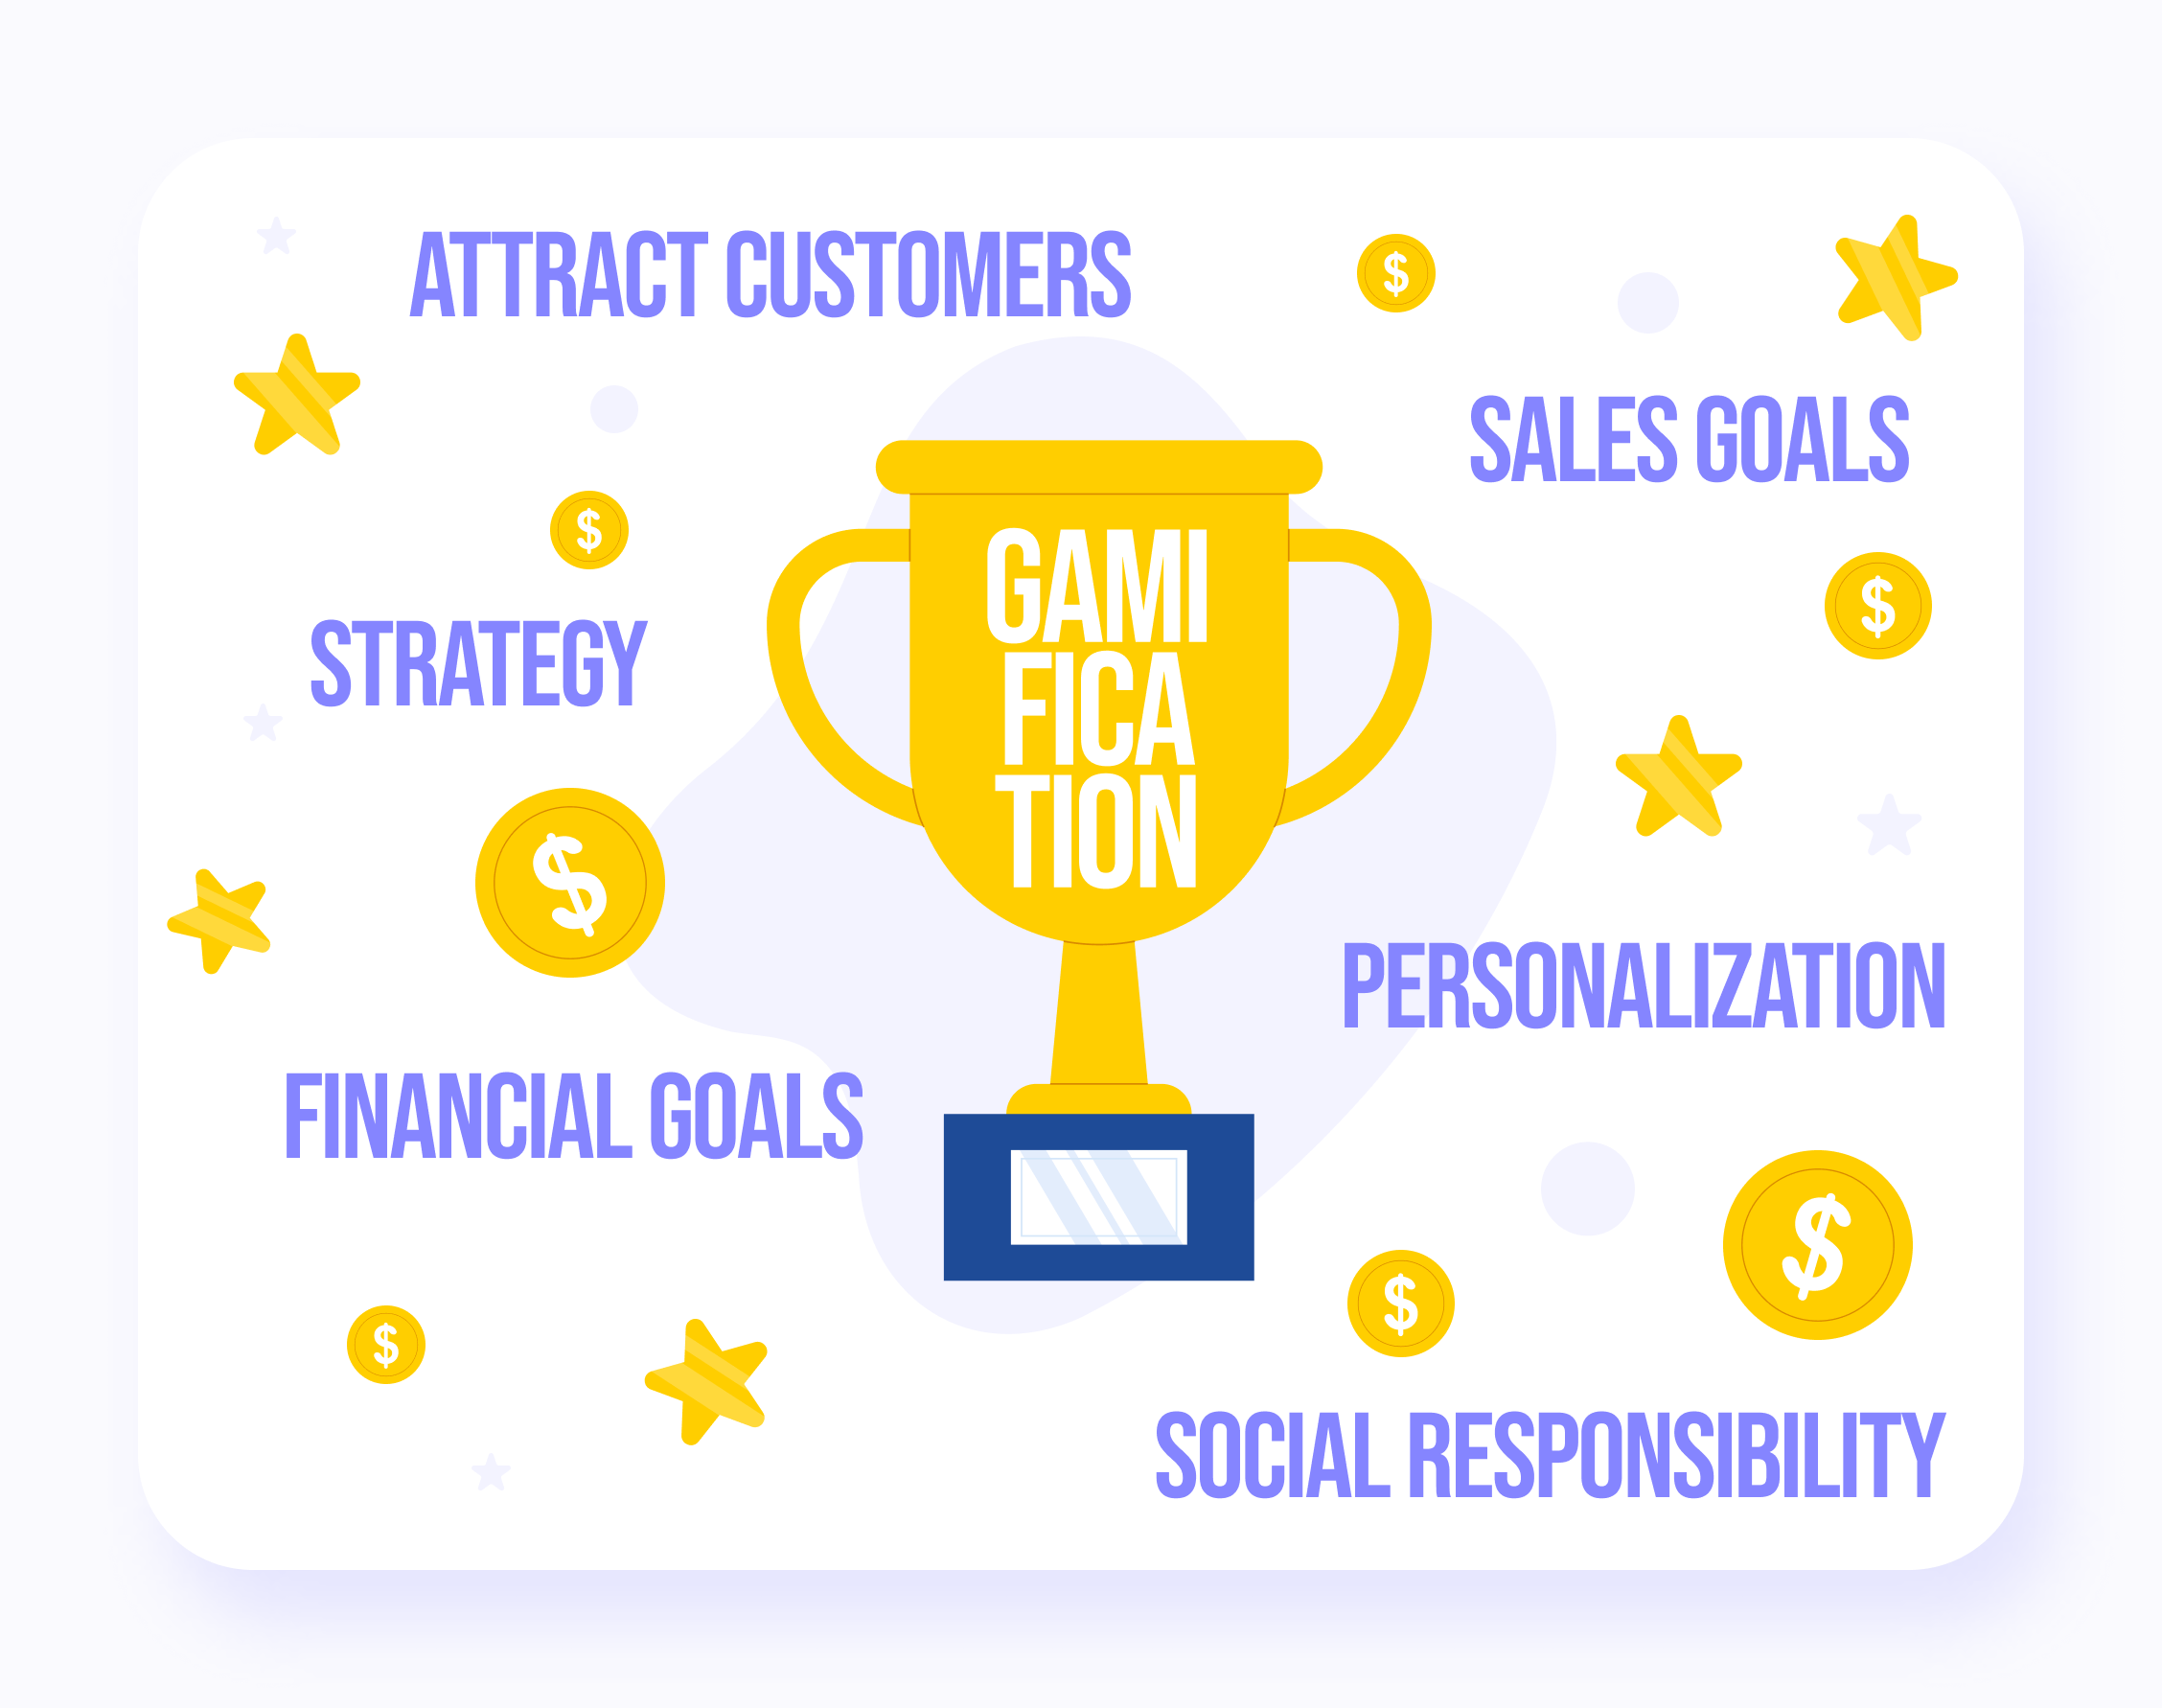 What gamification consists of?